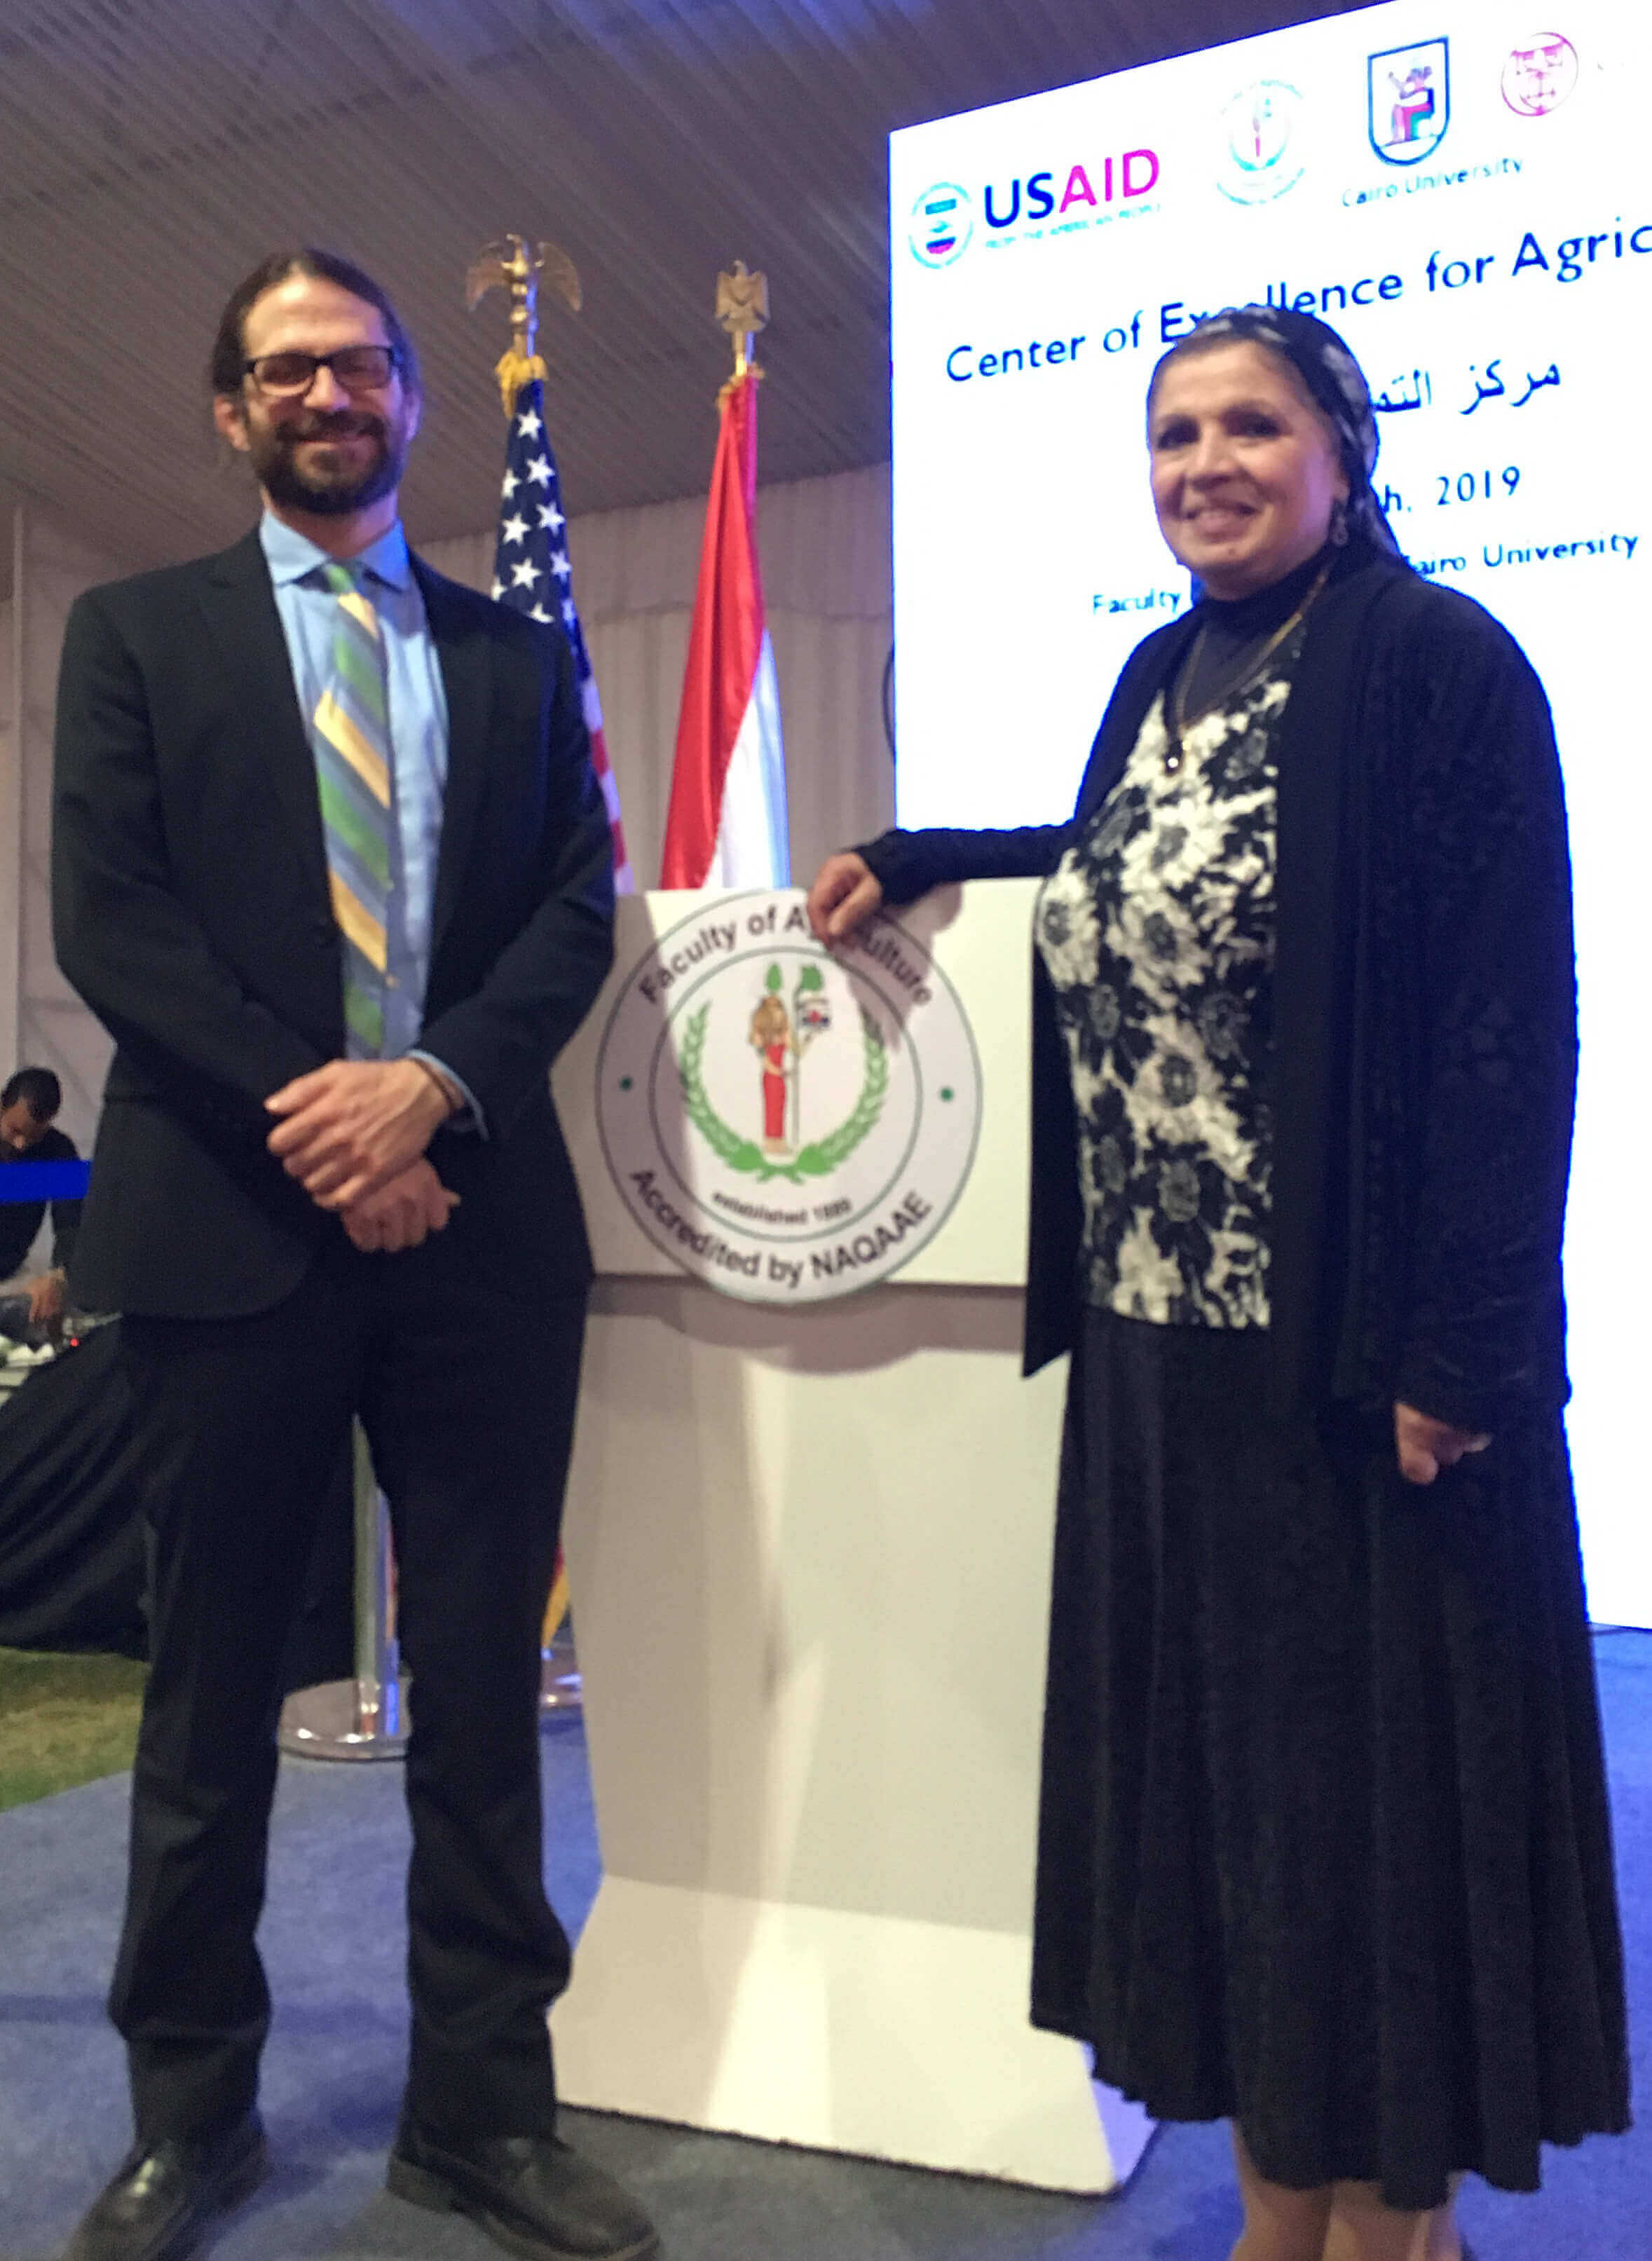 Paul Ebner, professor of animal sciences at Purdue, with Naglaa Abdallah, Chief or Party, Center of Excellence for Agriculture, at the project launch.